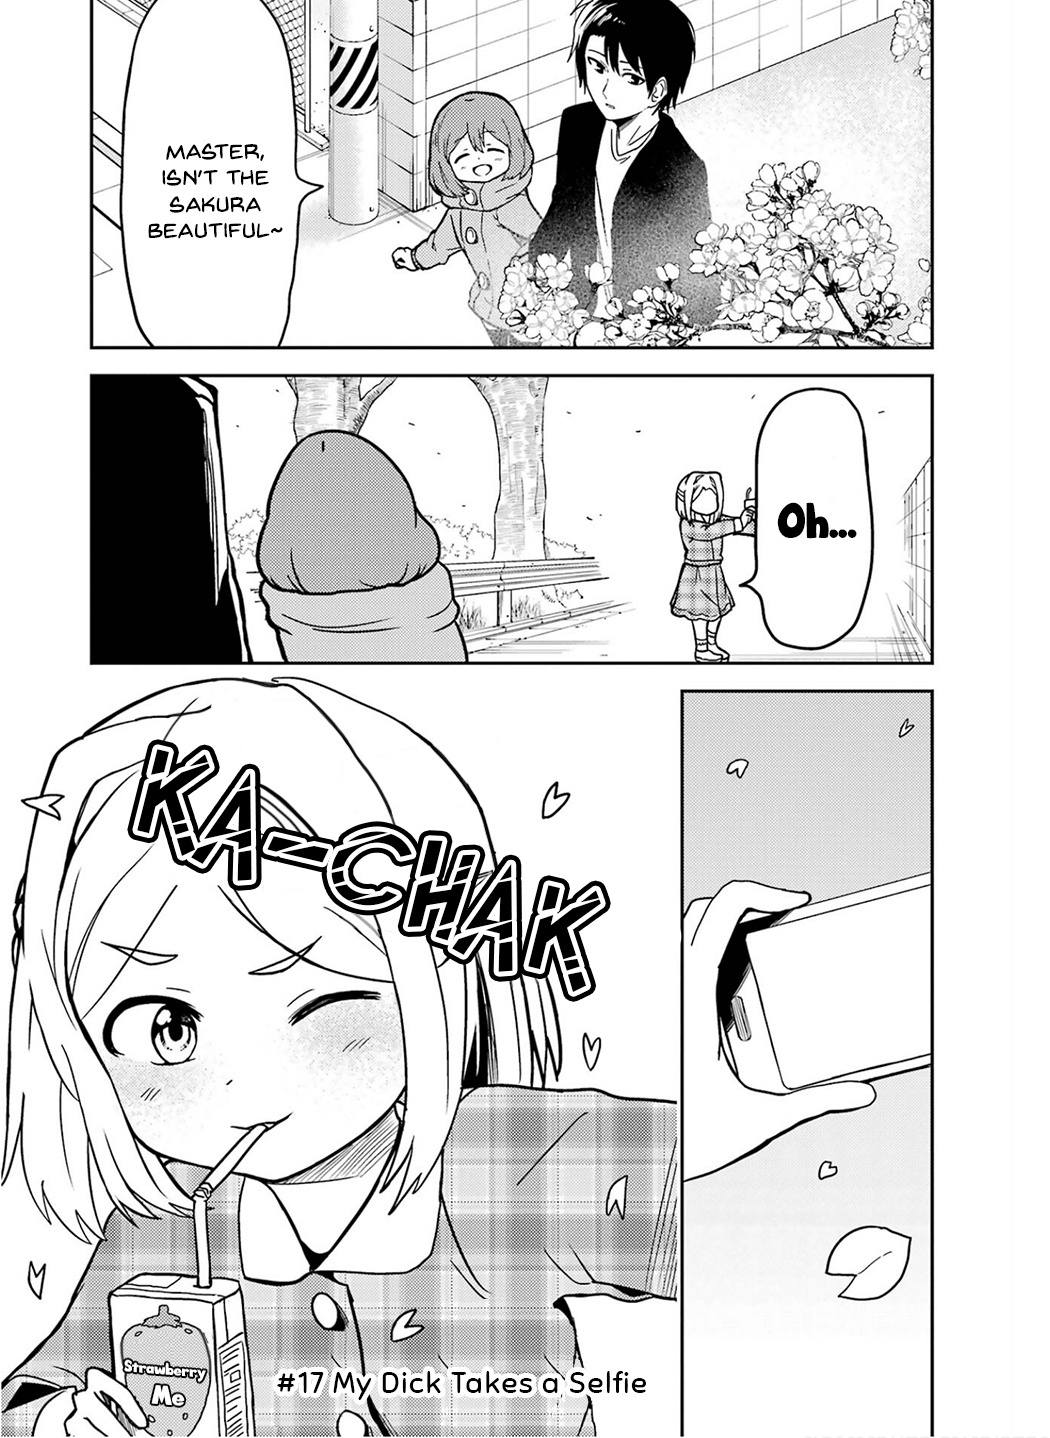 Turns Out My Dick Was A Cute Girl Vol.2 Chapter 17: My Dick Takes A Selfie - Picture 1